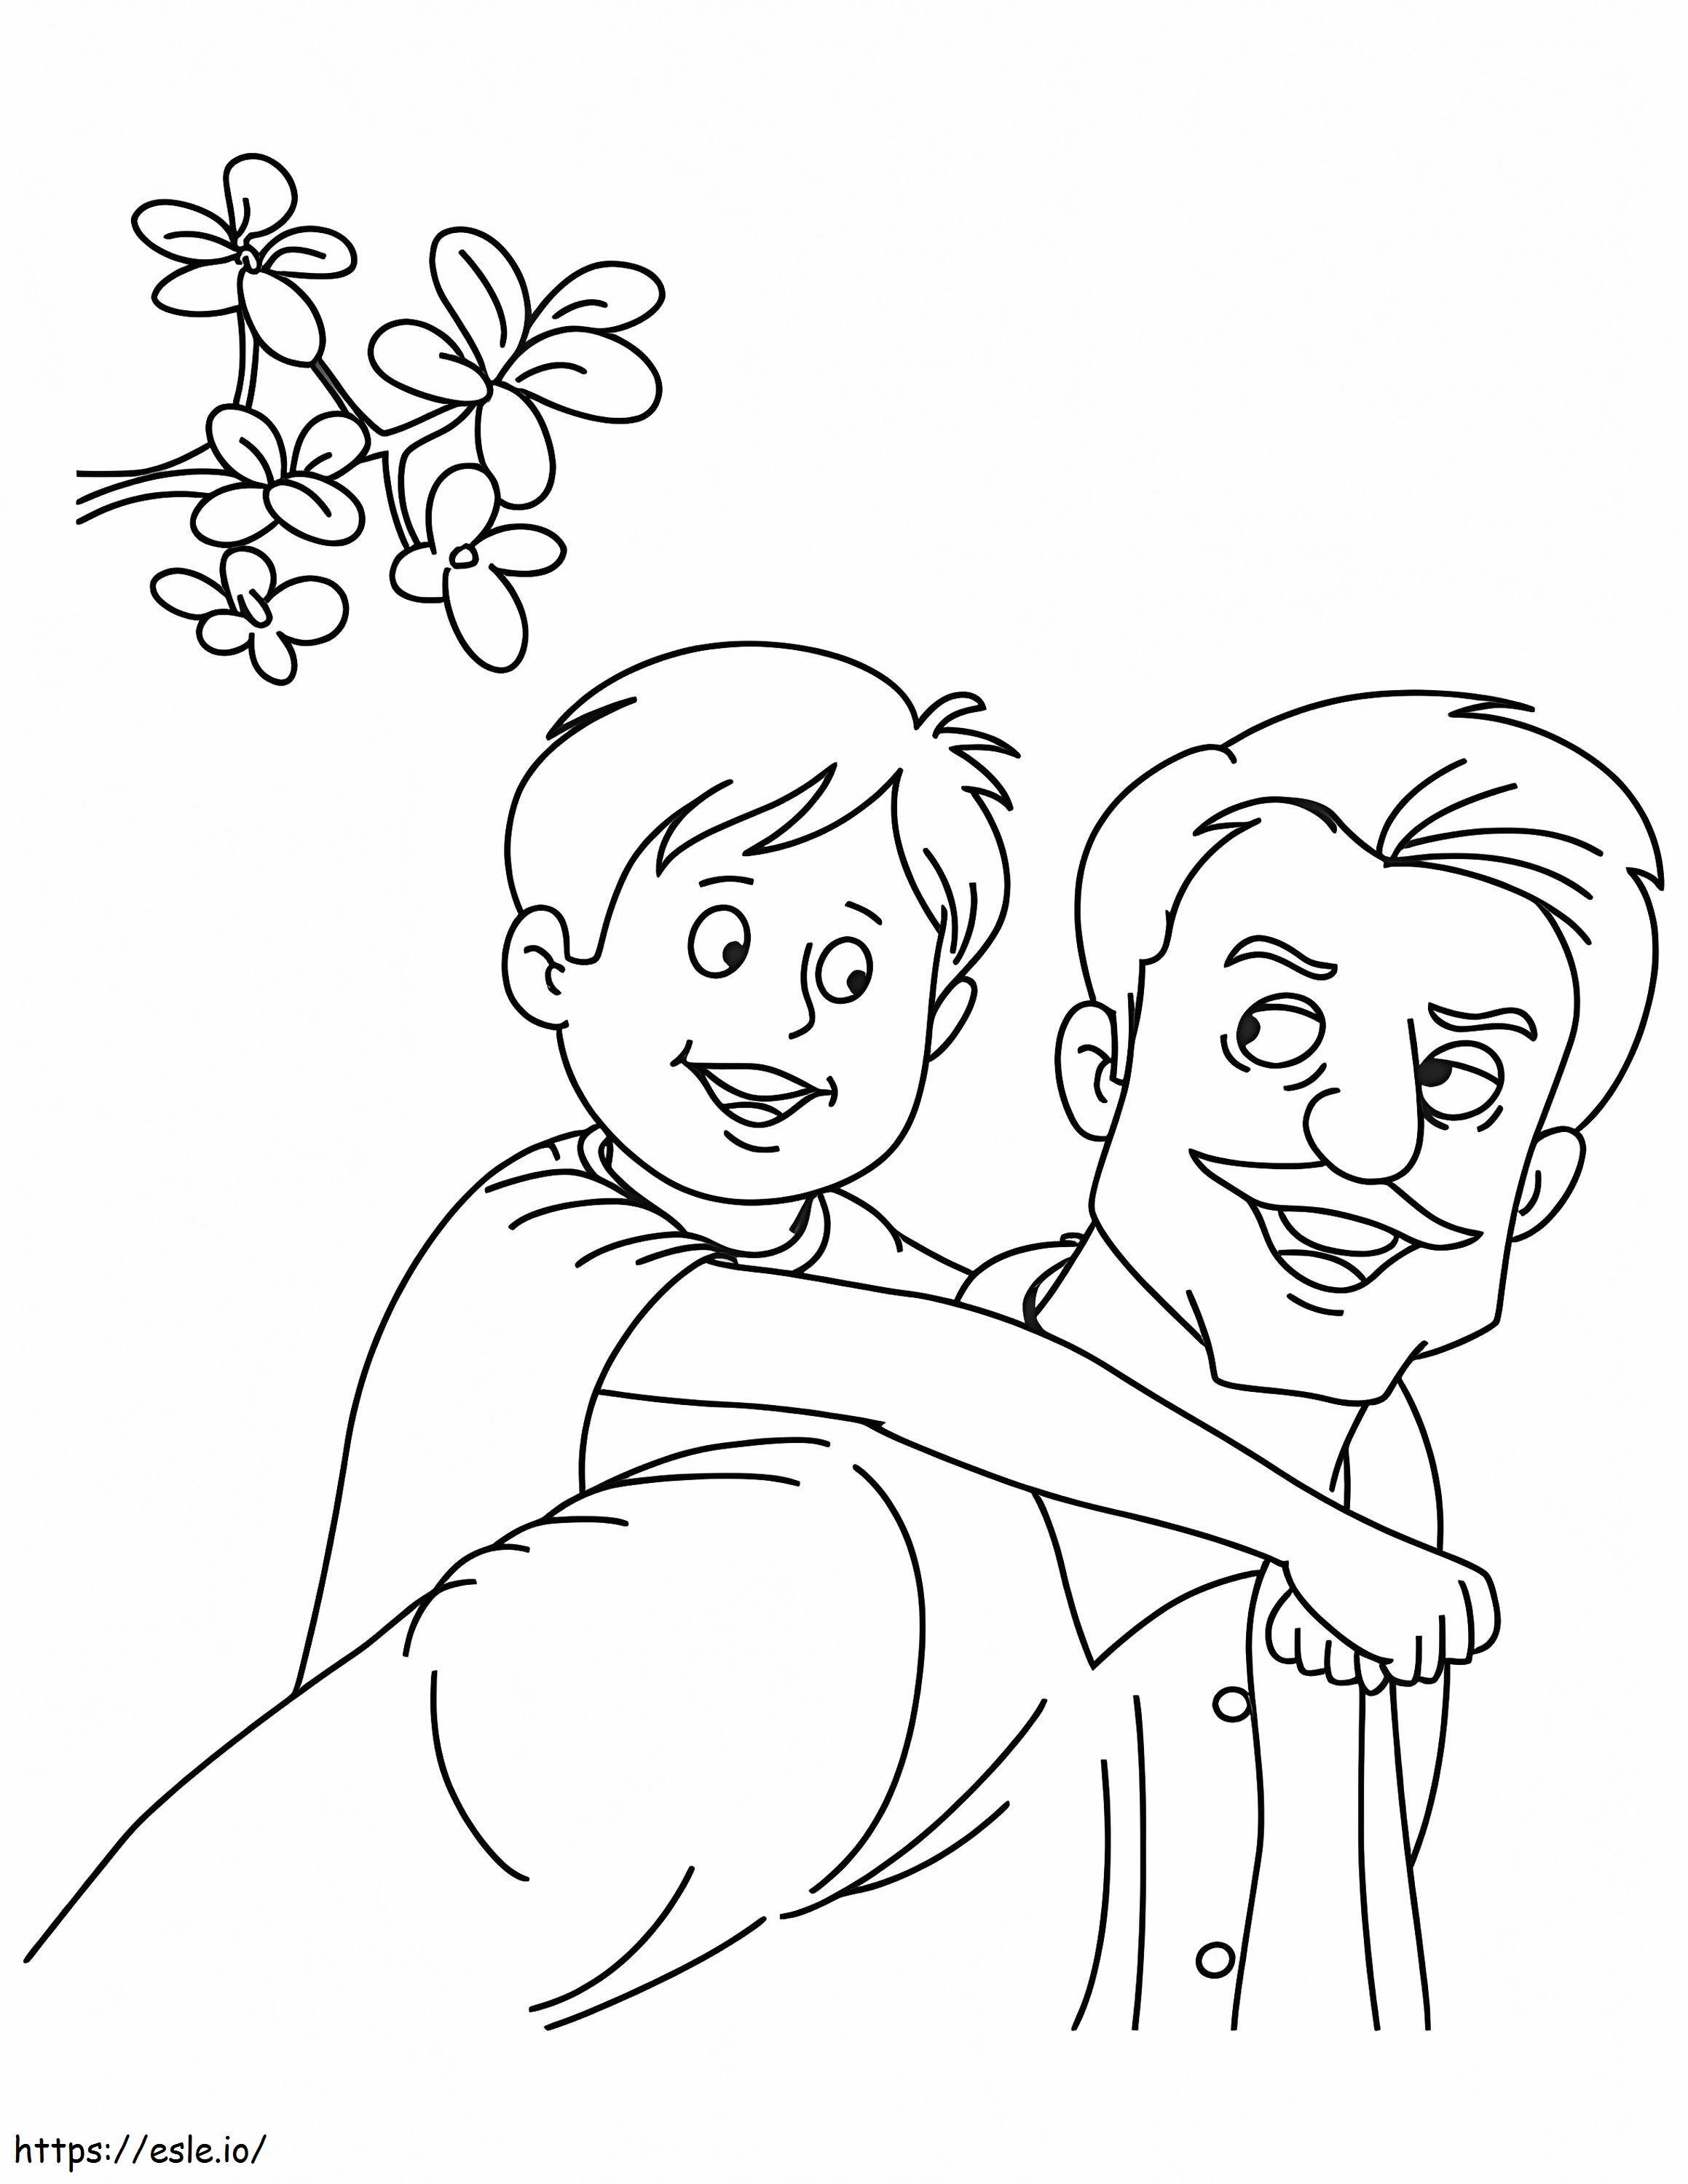 Father Process Of Carrying Child coloring page